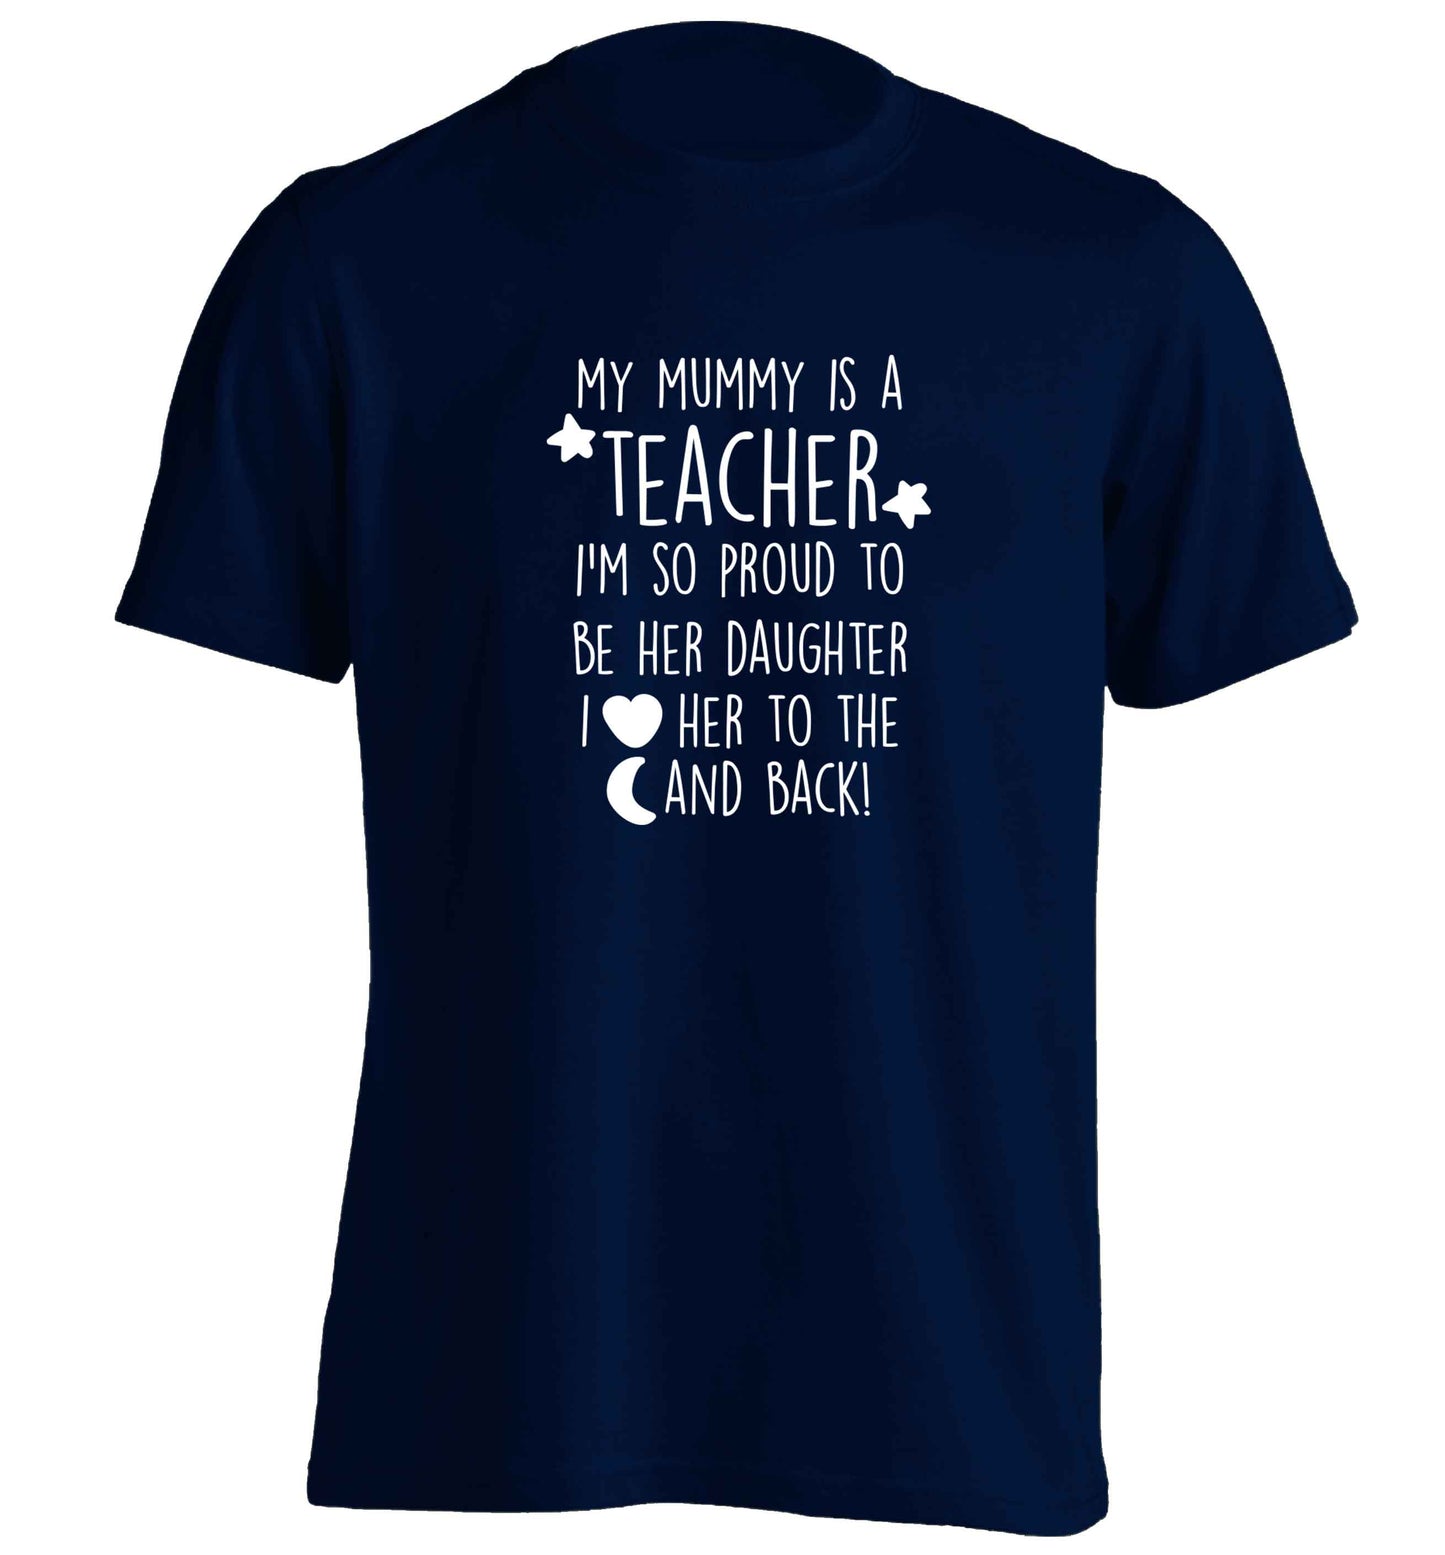 My mummy is a teacher I'm so proud to be her daughter I love her to the moon and back adults unisex navy Tshirt 2XL